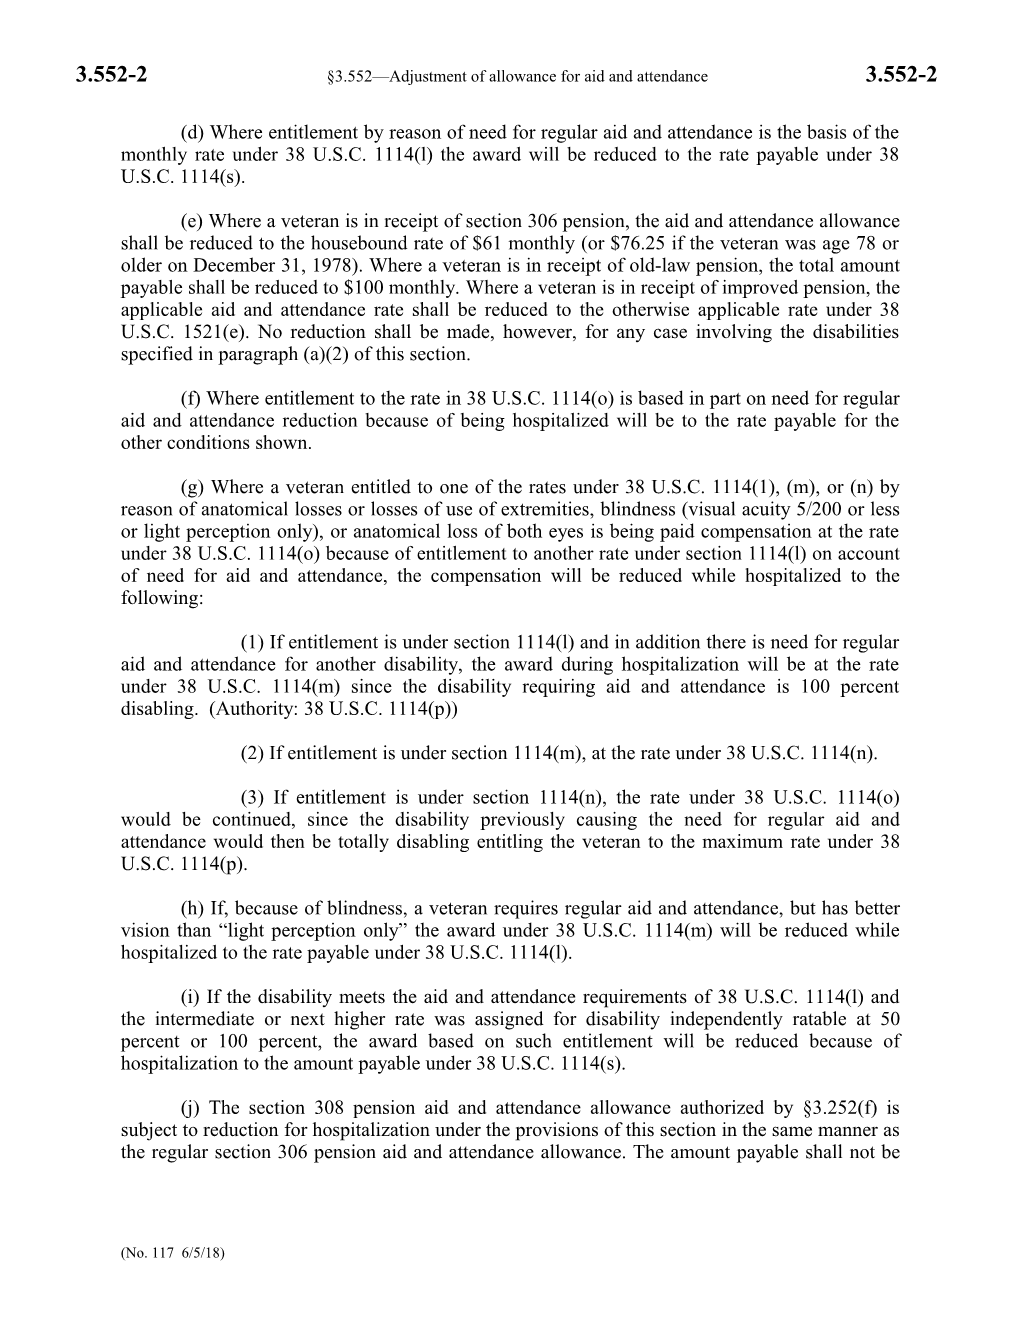 3.552 Adjustment of Allowance for Aid and Attendance